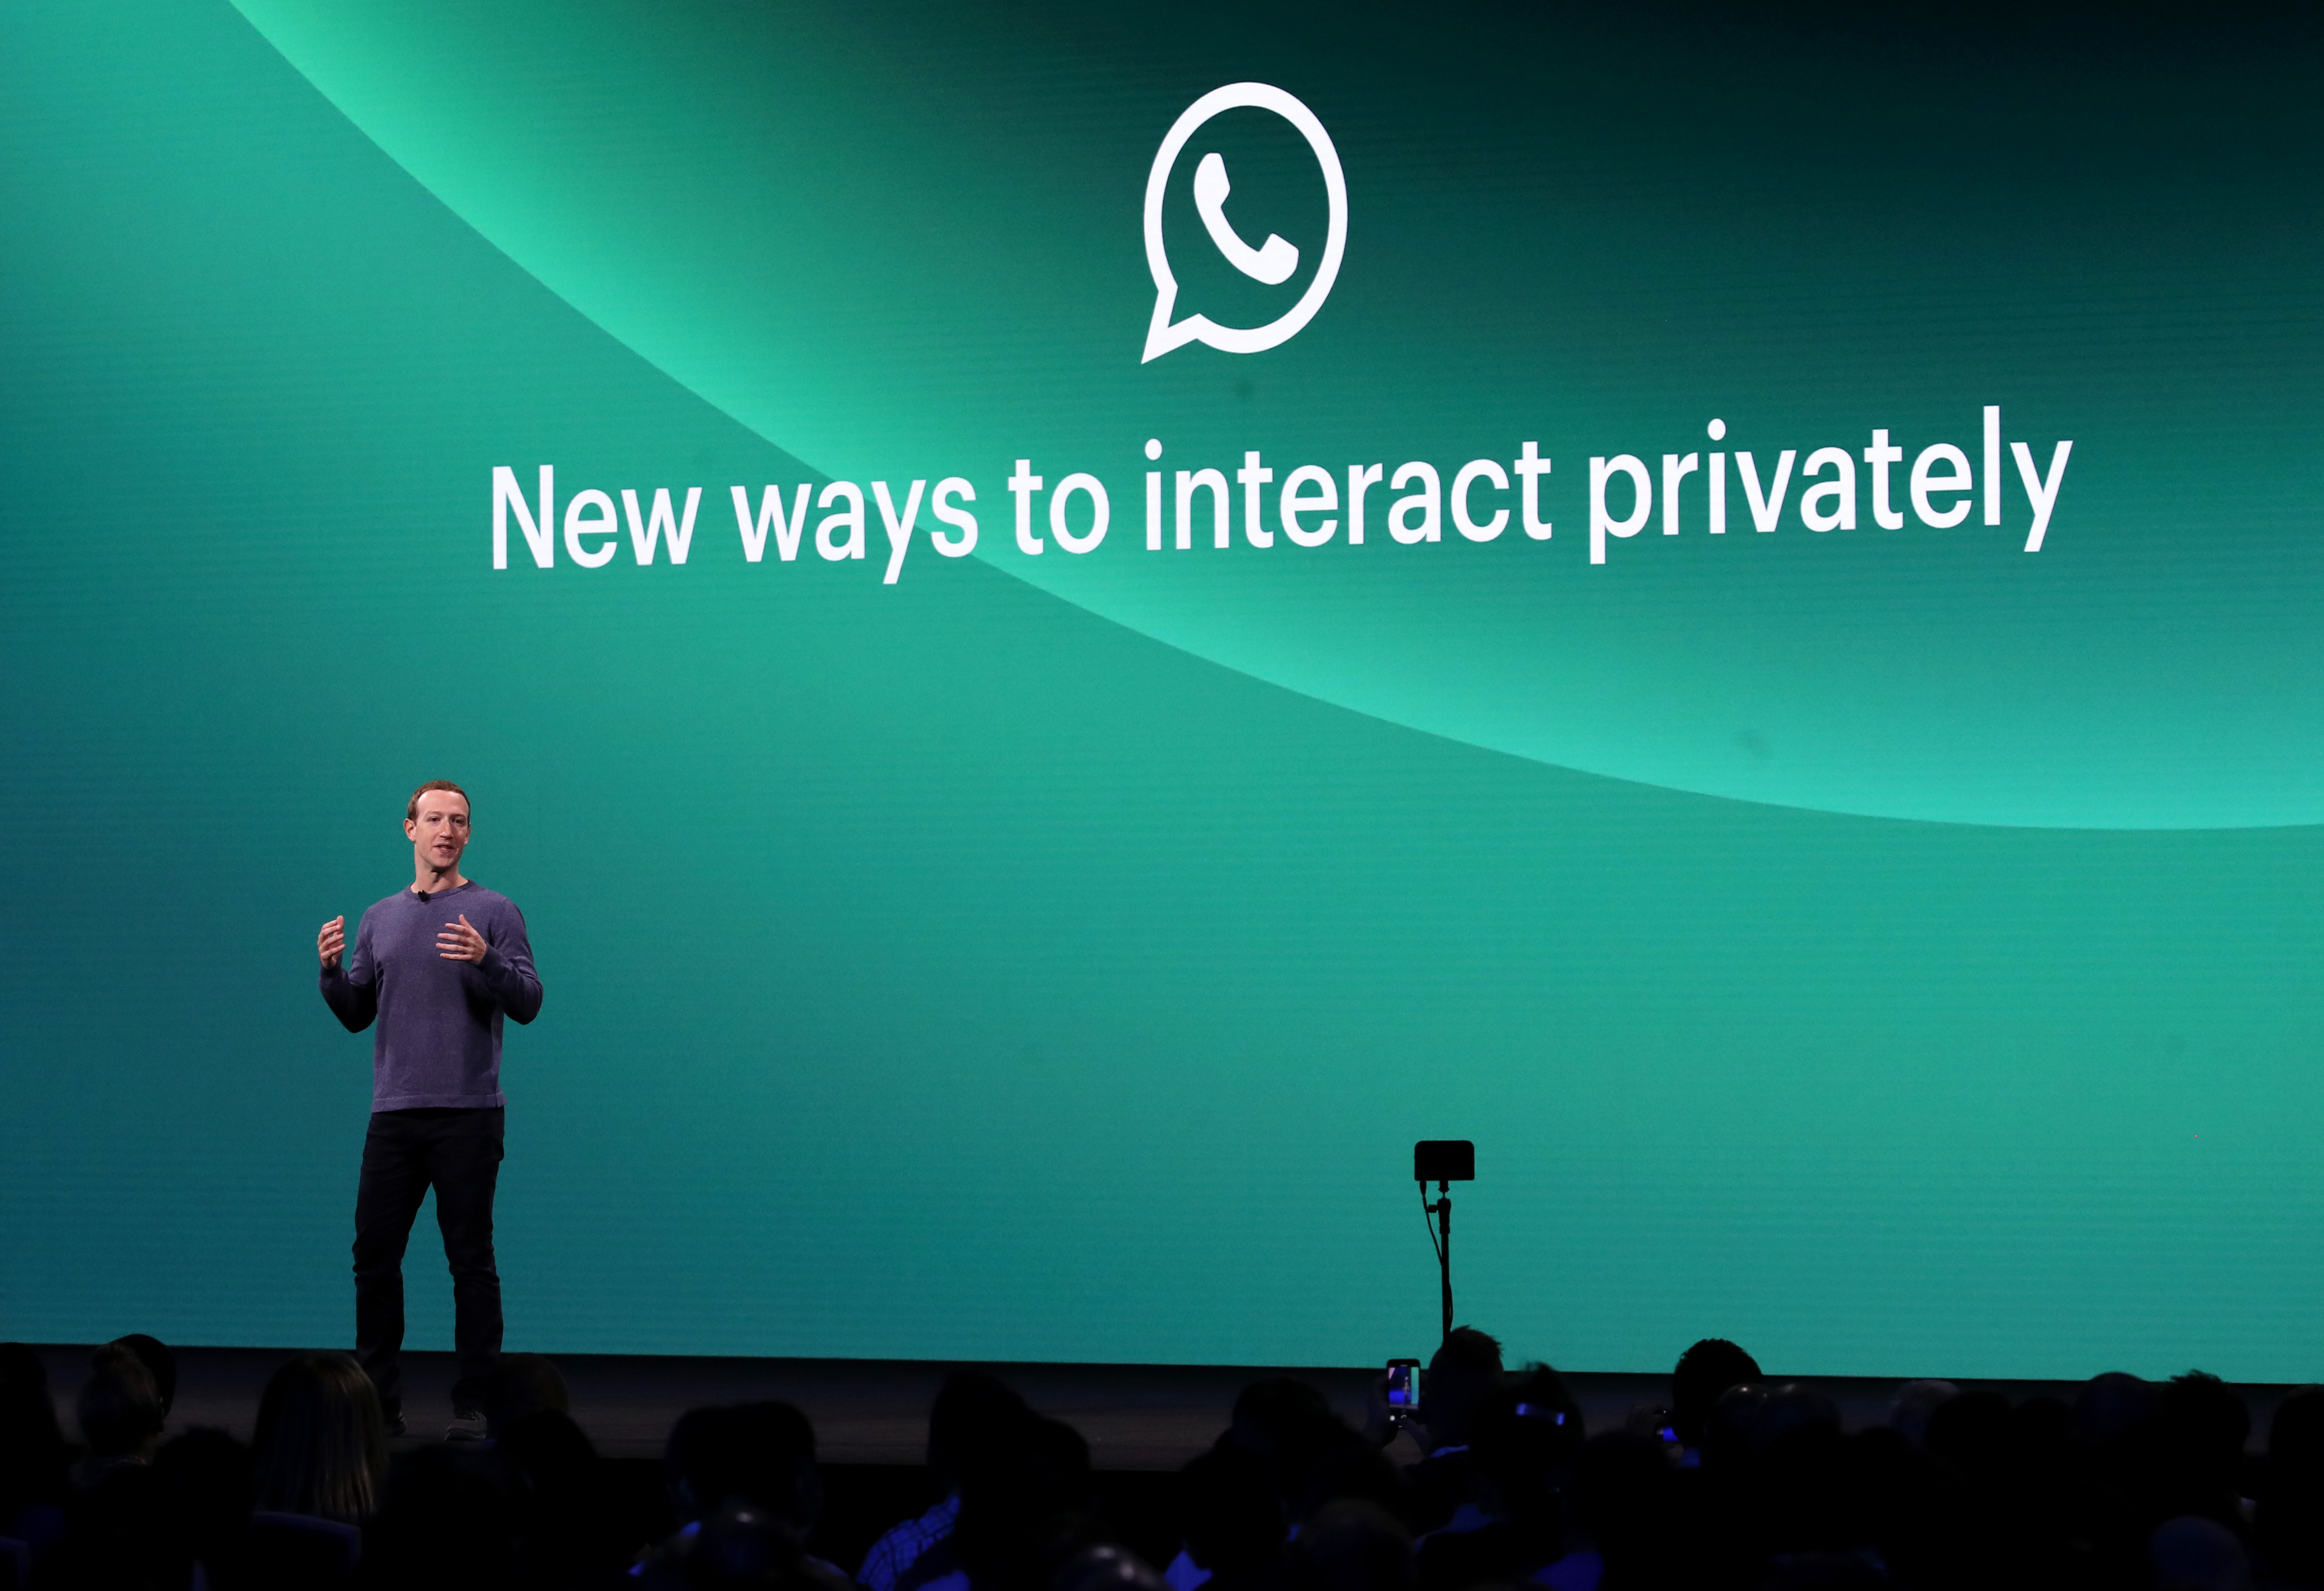 Facebook CEO Mark Zuckerberg at Facebook’s F8 developer conference standing onstage in front of a screen reading, “New ways to interact privately.”